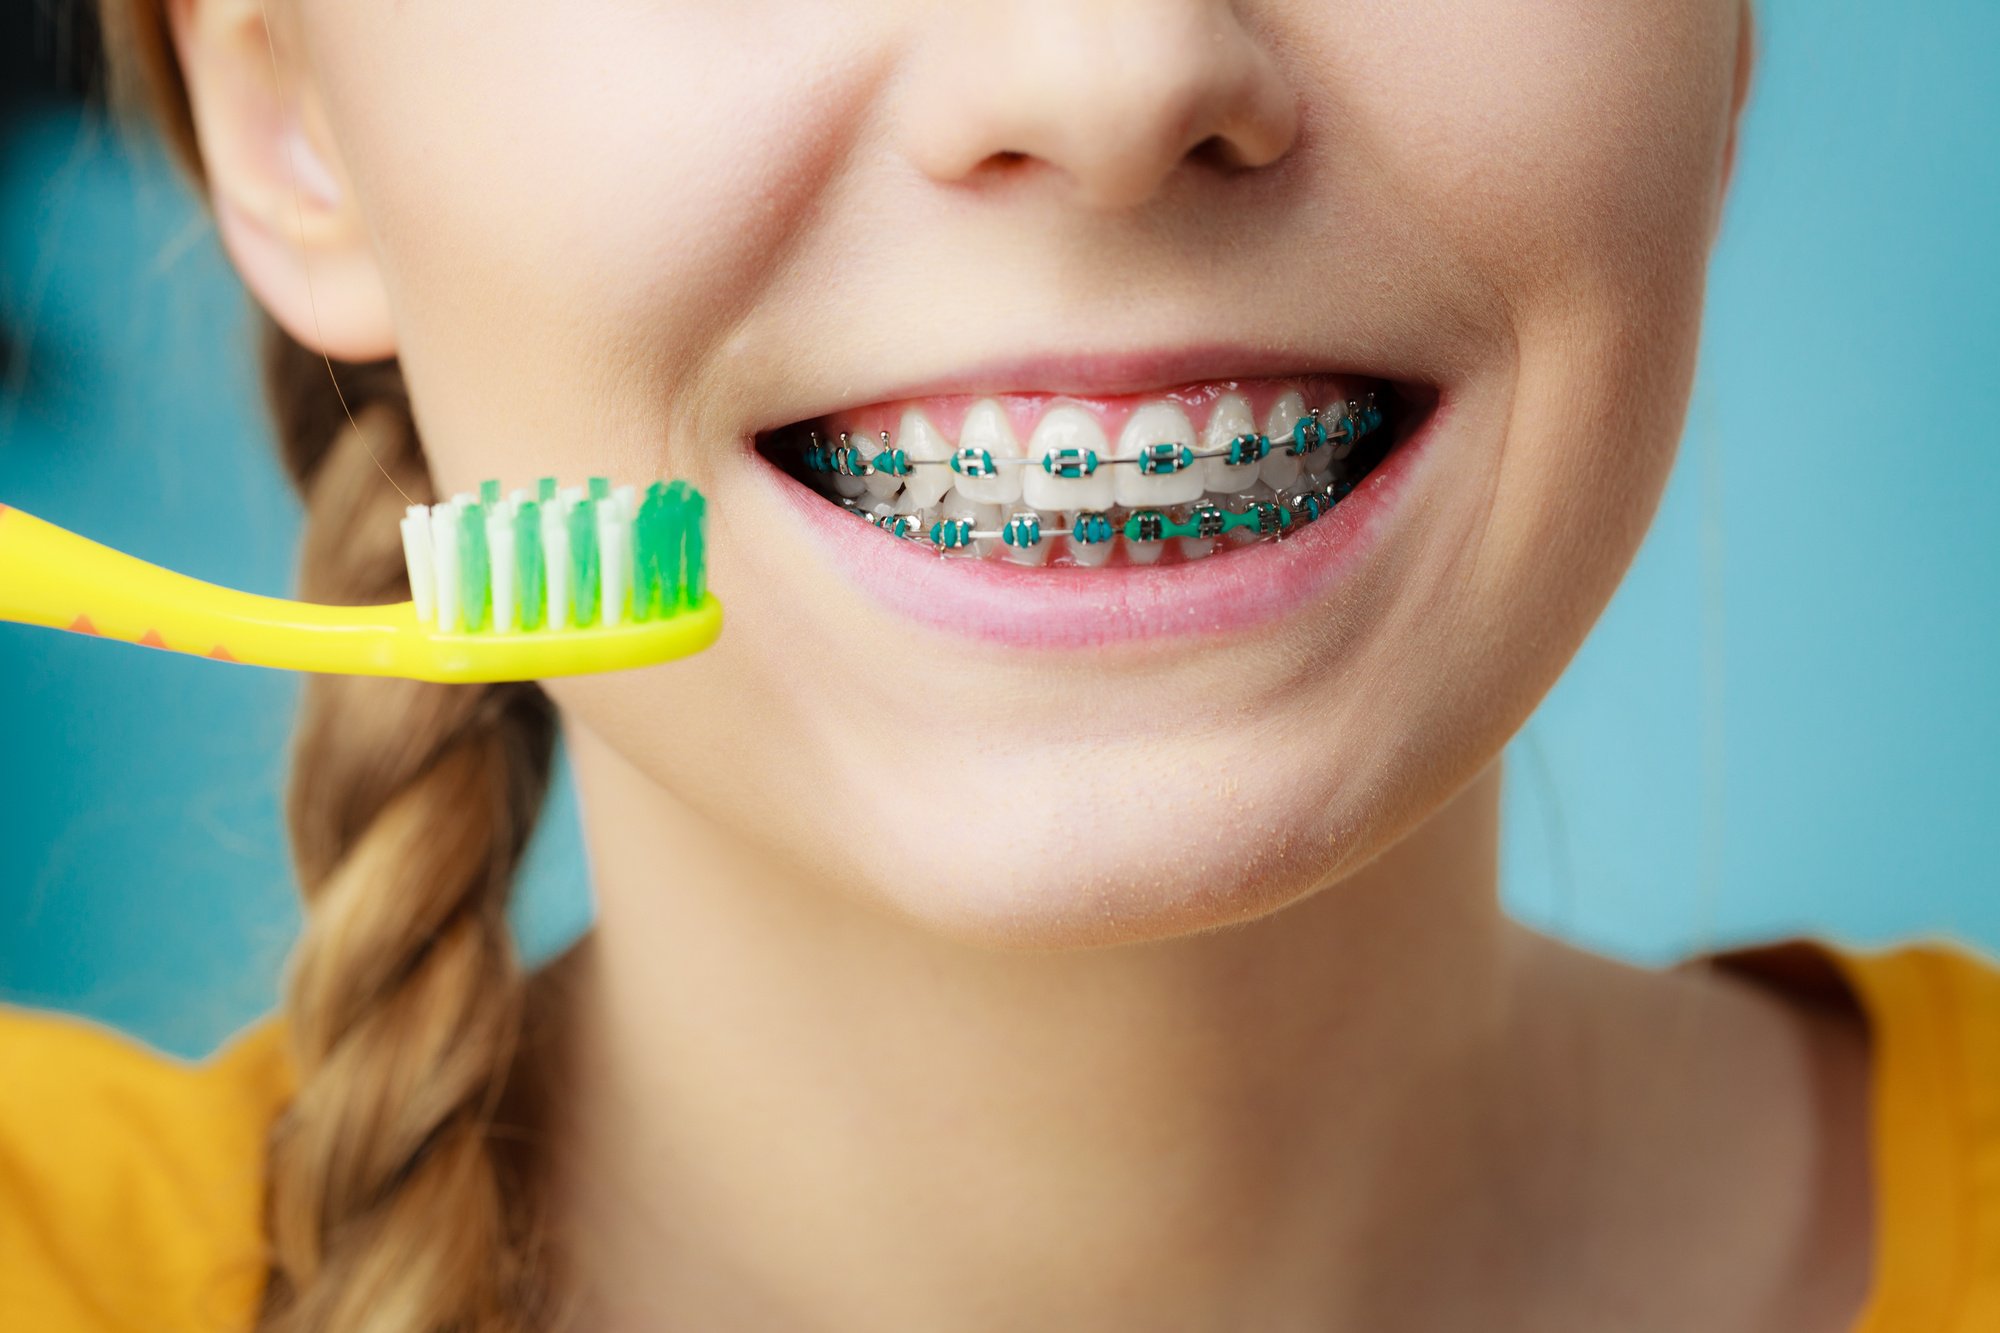 Top 7 Oral Hygiene Tips for Those Wearing Braces